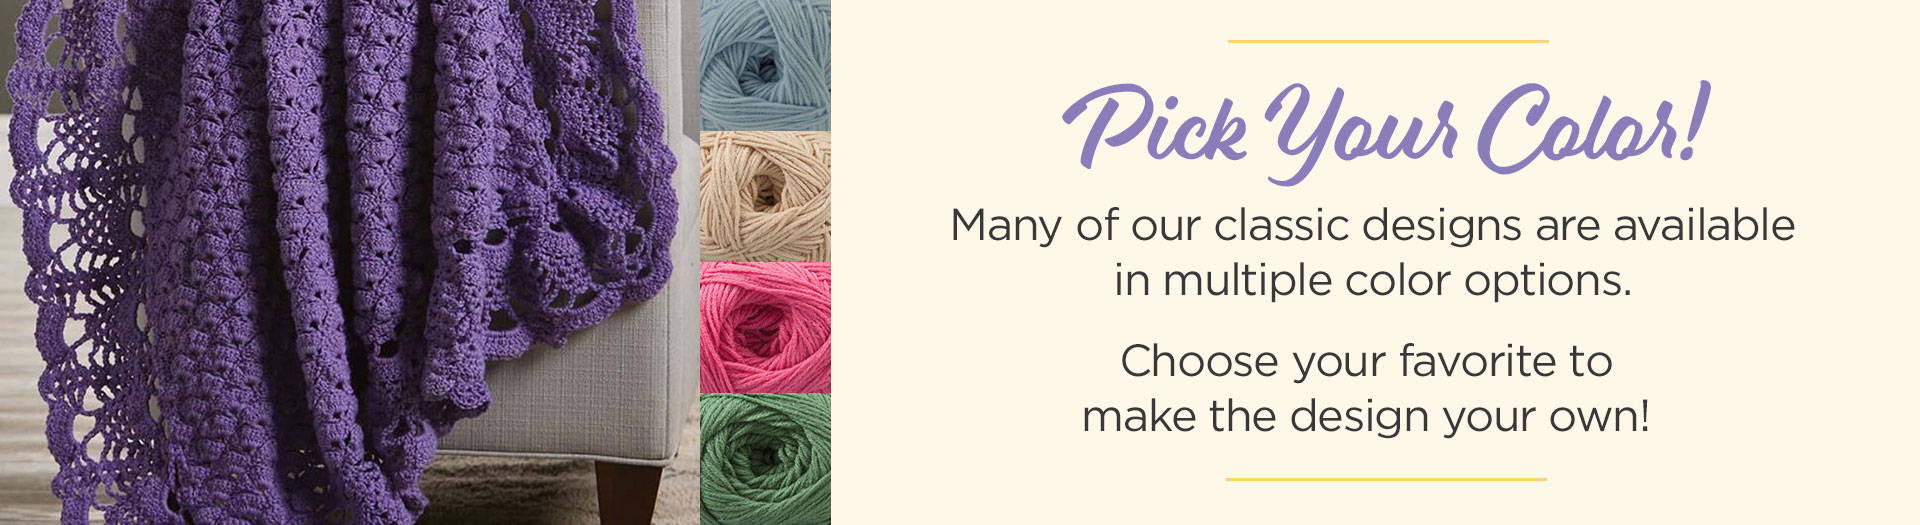 Pick your color! Many of our classic designs are available in multiple color options. Choose your favorite to make the design your own! 